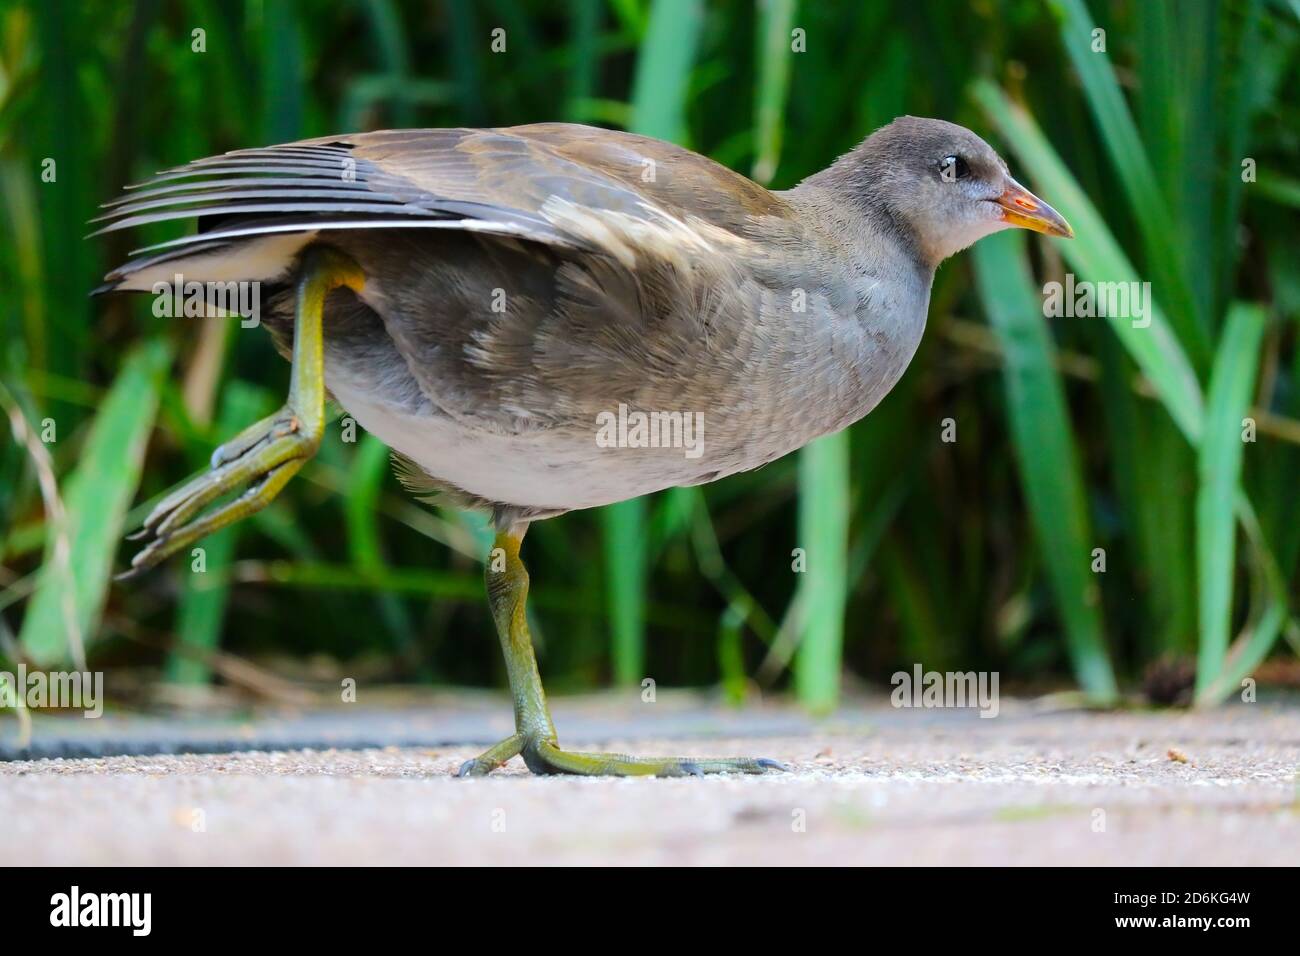 Juvenile common moorhen, gallinula chloropus in side view standing on one leg and spreading its wings in front of green grasses Stock Photo